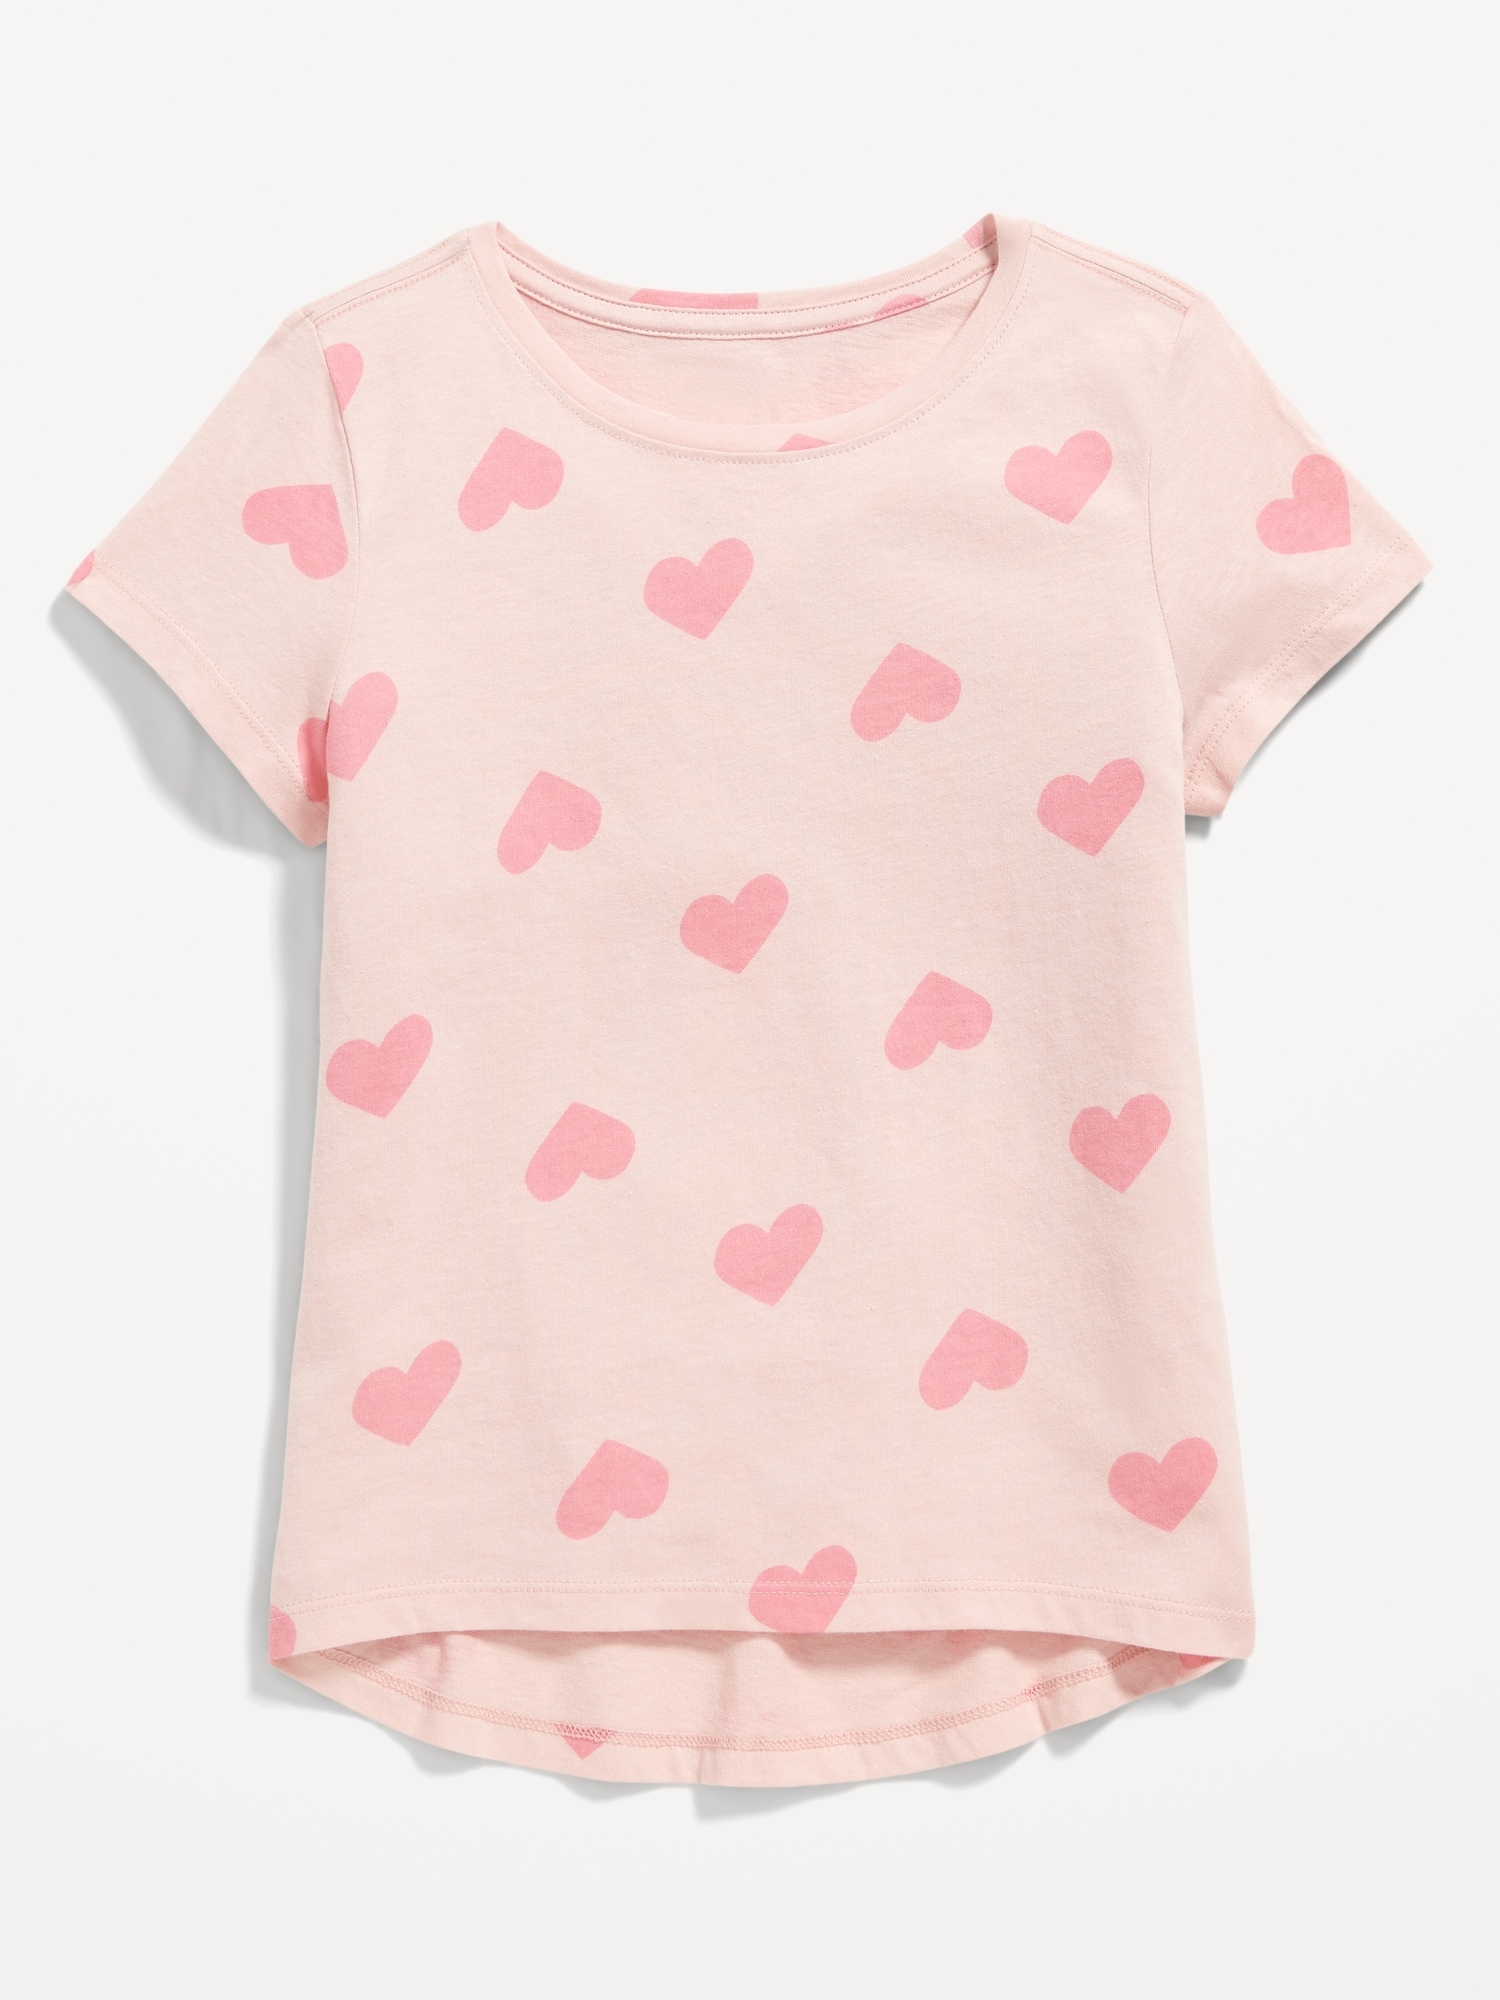 Softest Printed T-Shirt for Girls | Old Navy